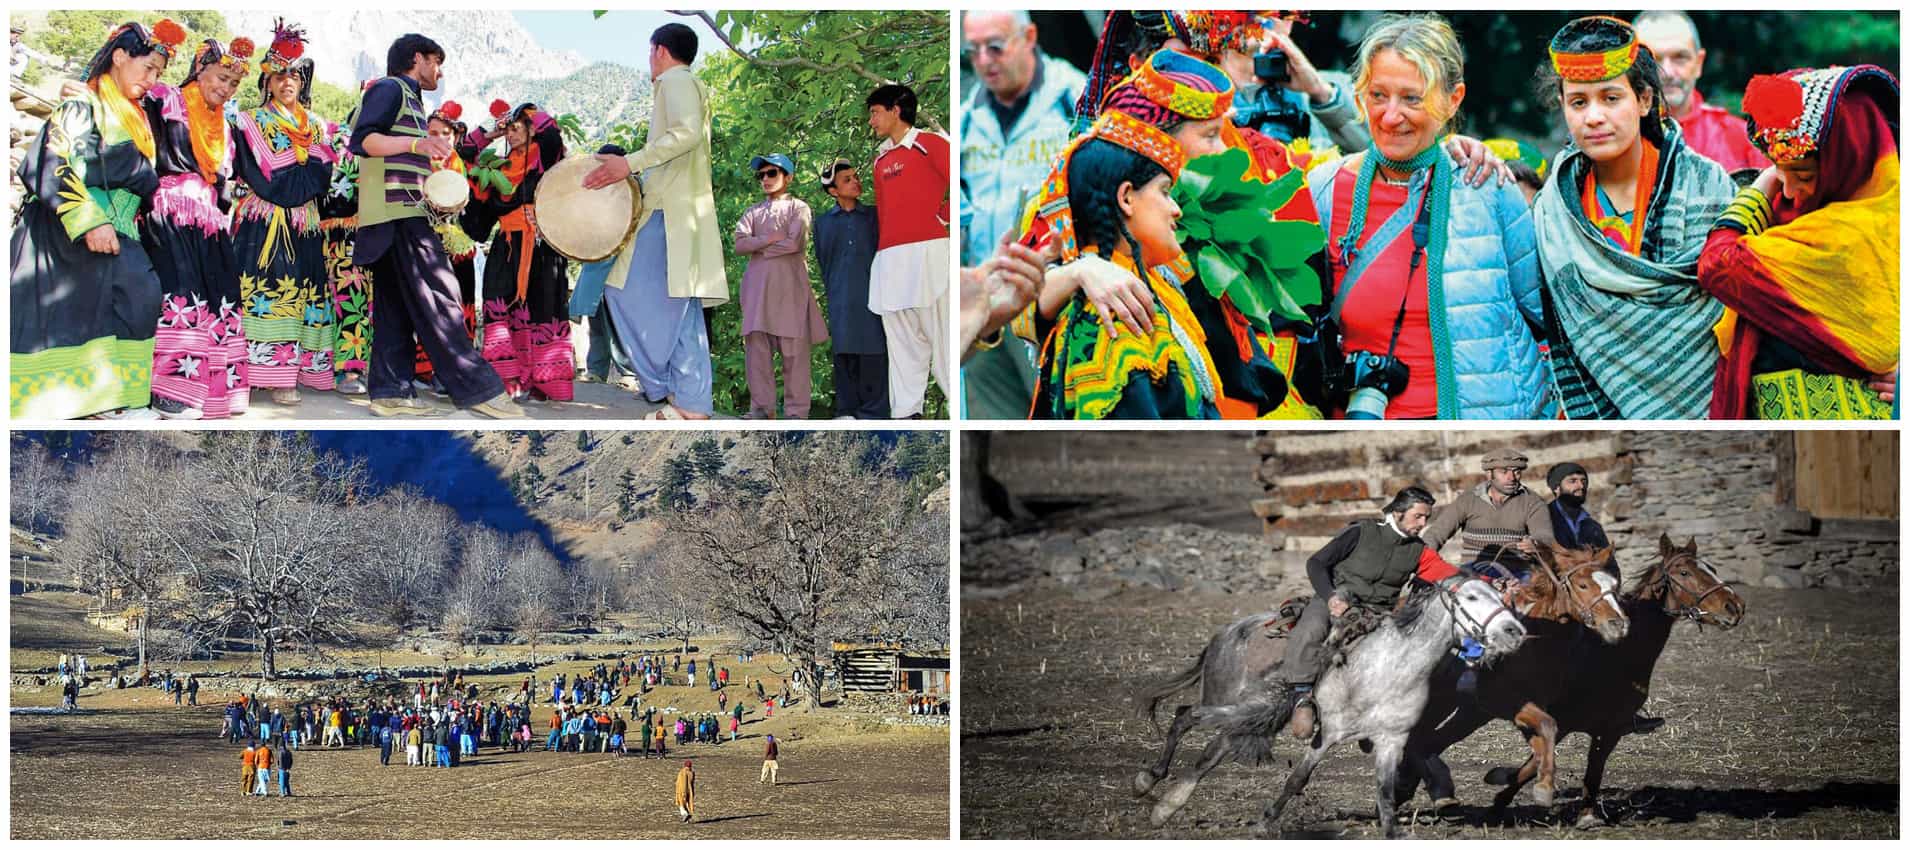 Local and Foreign Tourists Enjoy Festival Activities in Valley Of ...